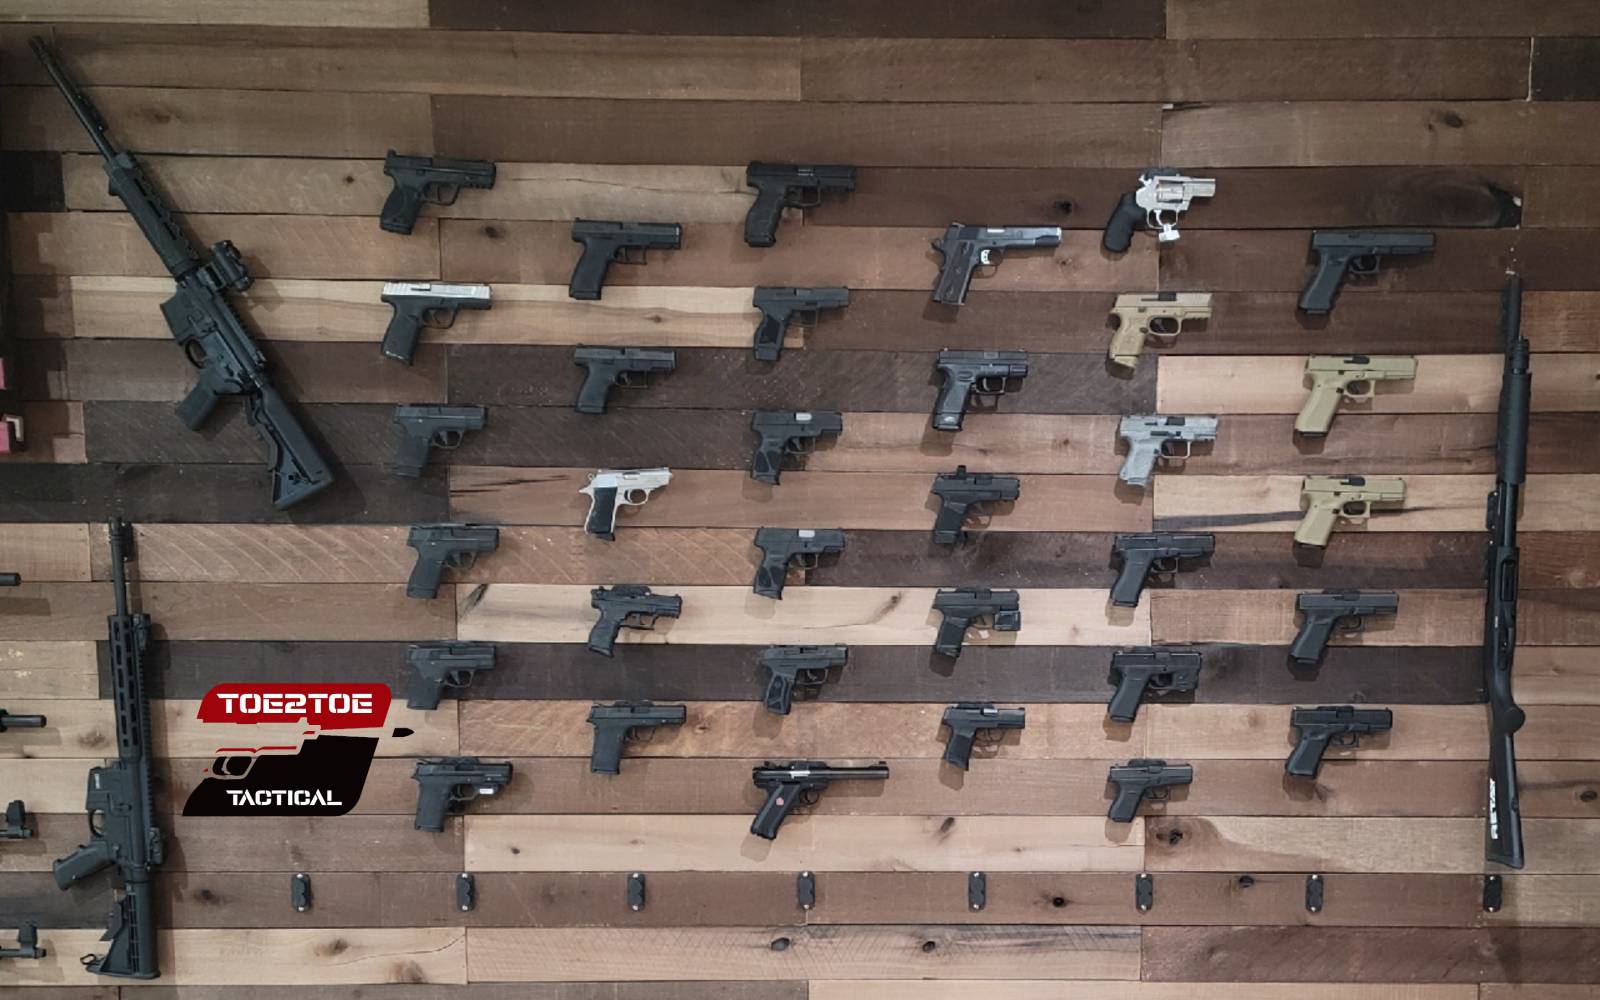 Wall of fun - All your self-defense needs in one place!